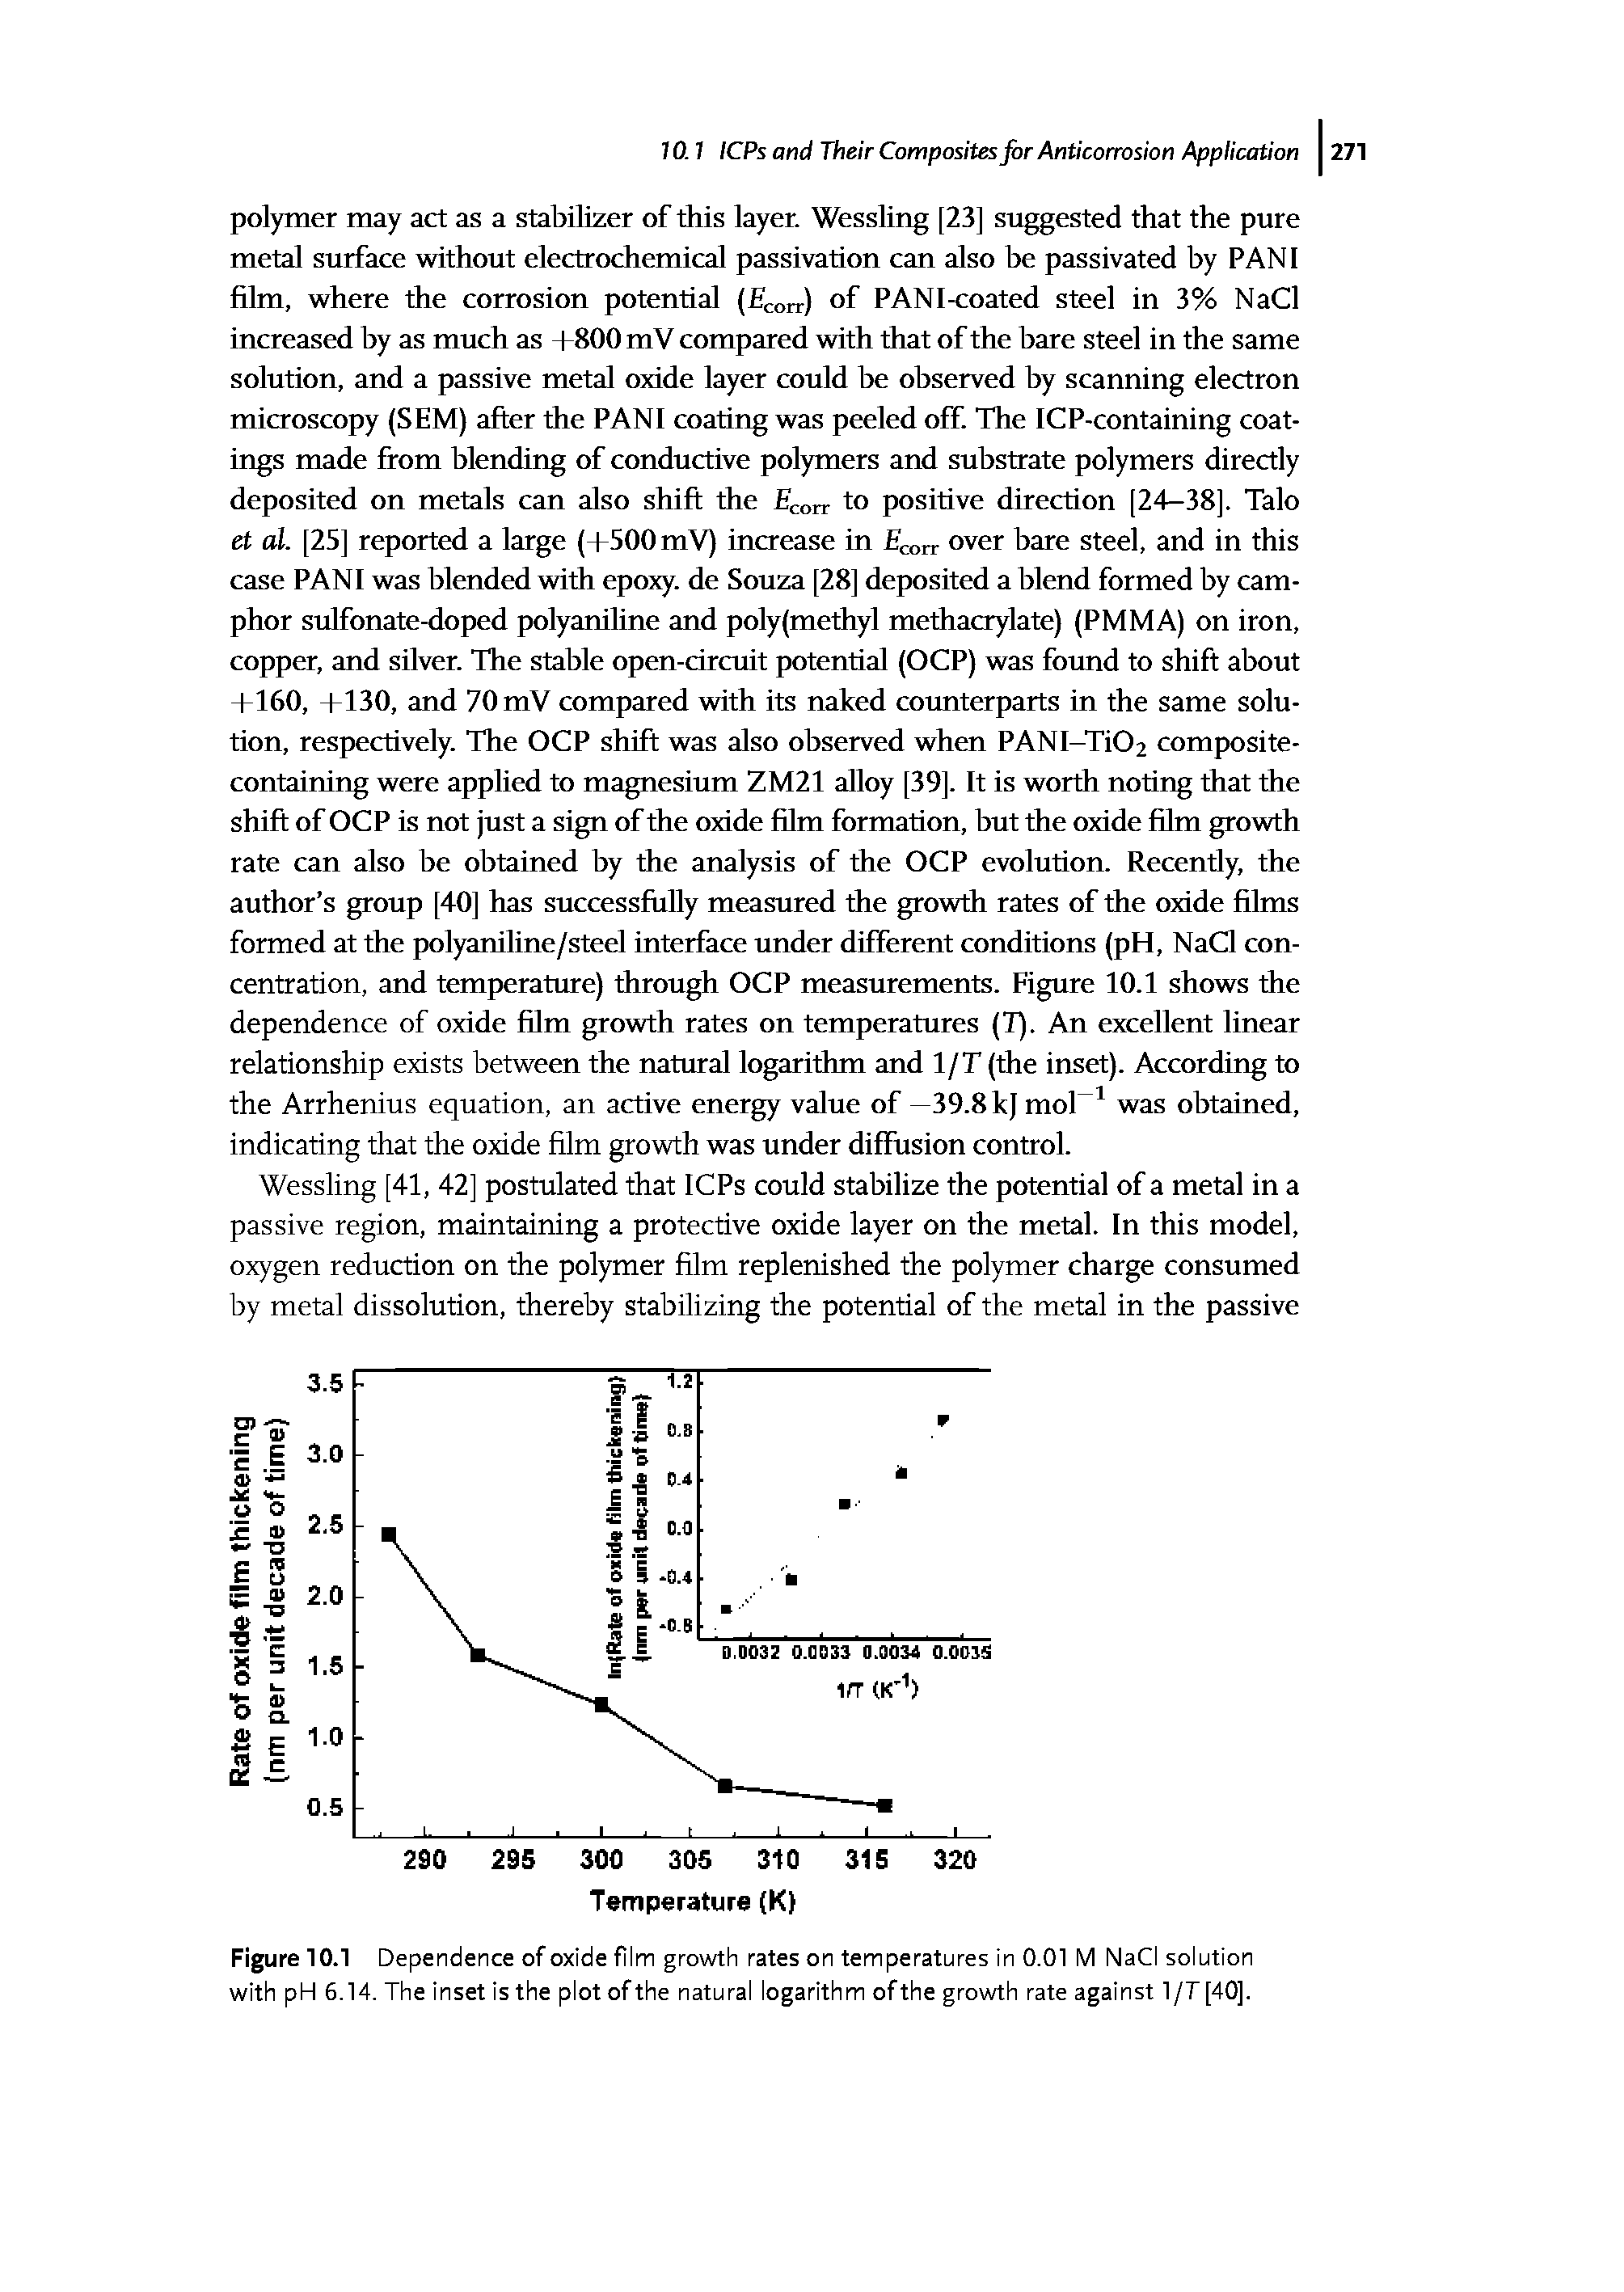 Figure 10.1 Dependence of oxide film growth rates on temperatures in 0.01 M NaCI solution with pH 6.14. The inset is the plot of the natural logarithm of the growth rate against 1 /T[40j.